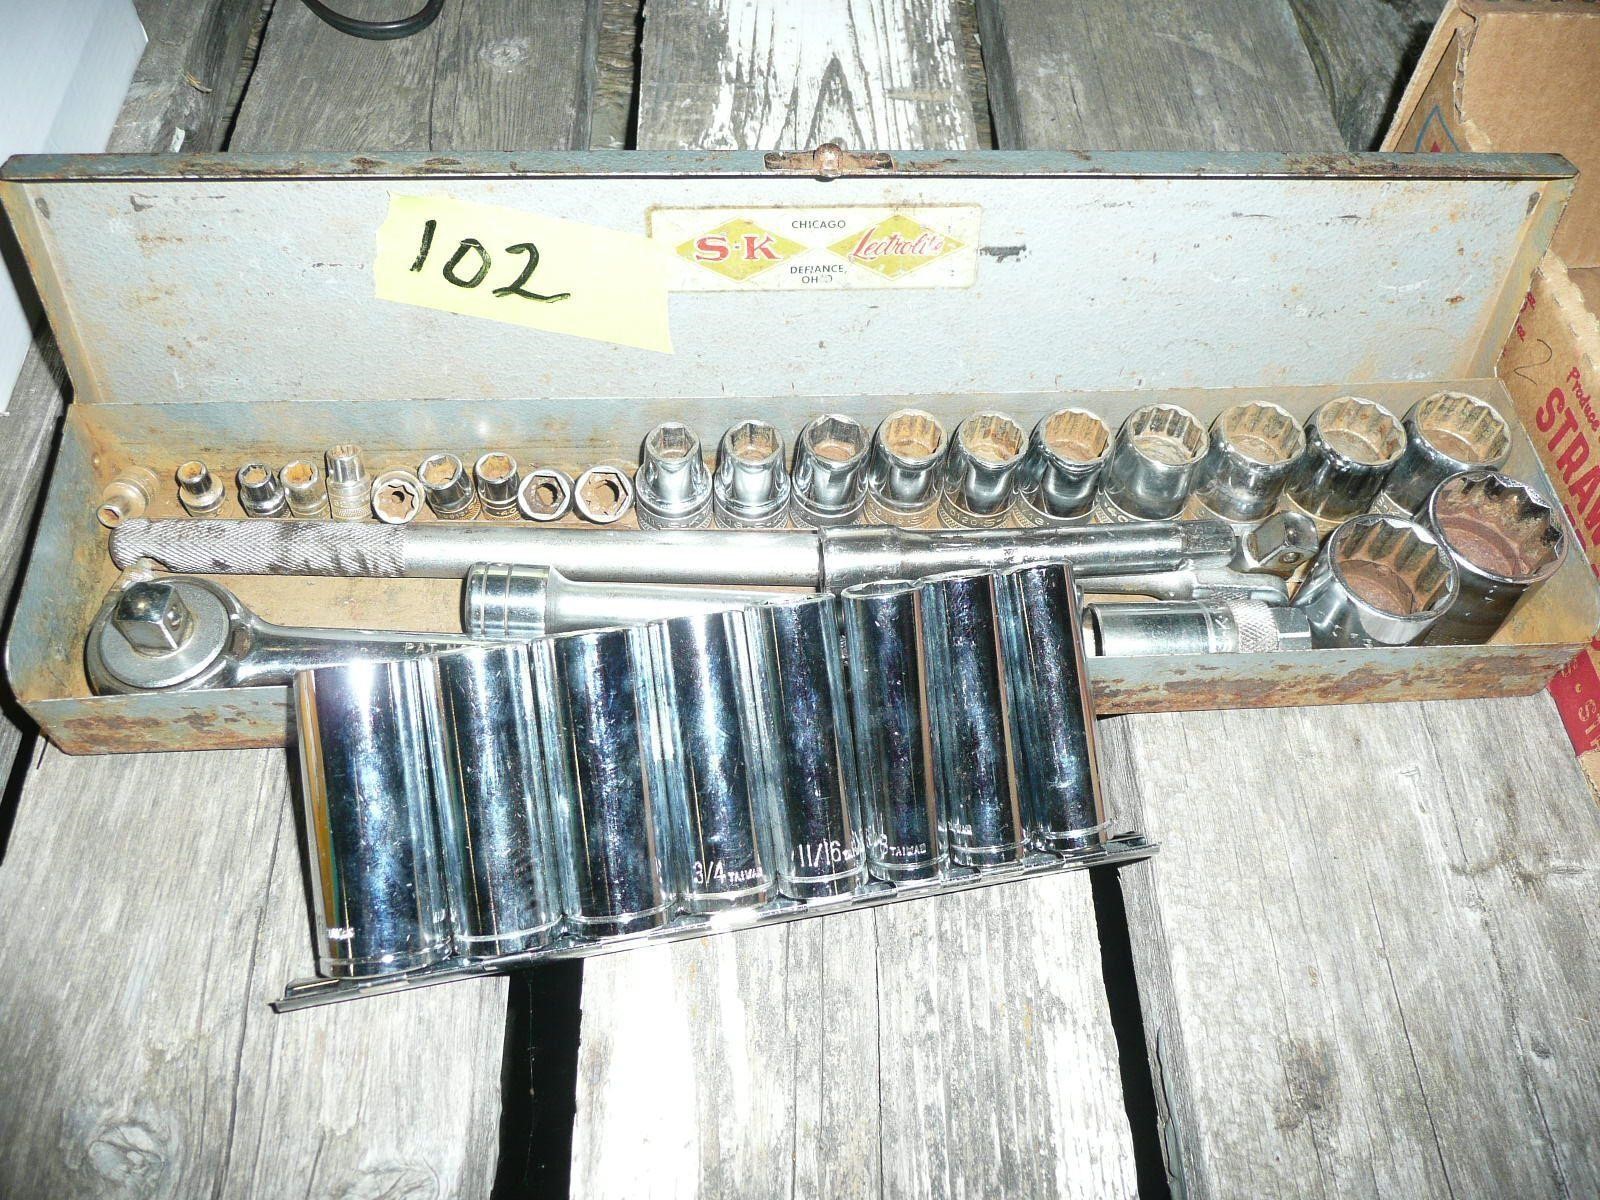 Sets of !/2 Inch Sockets